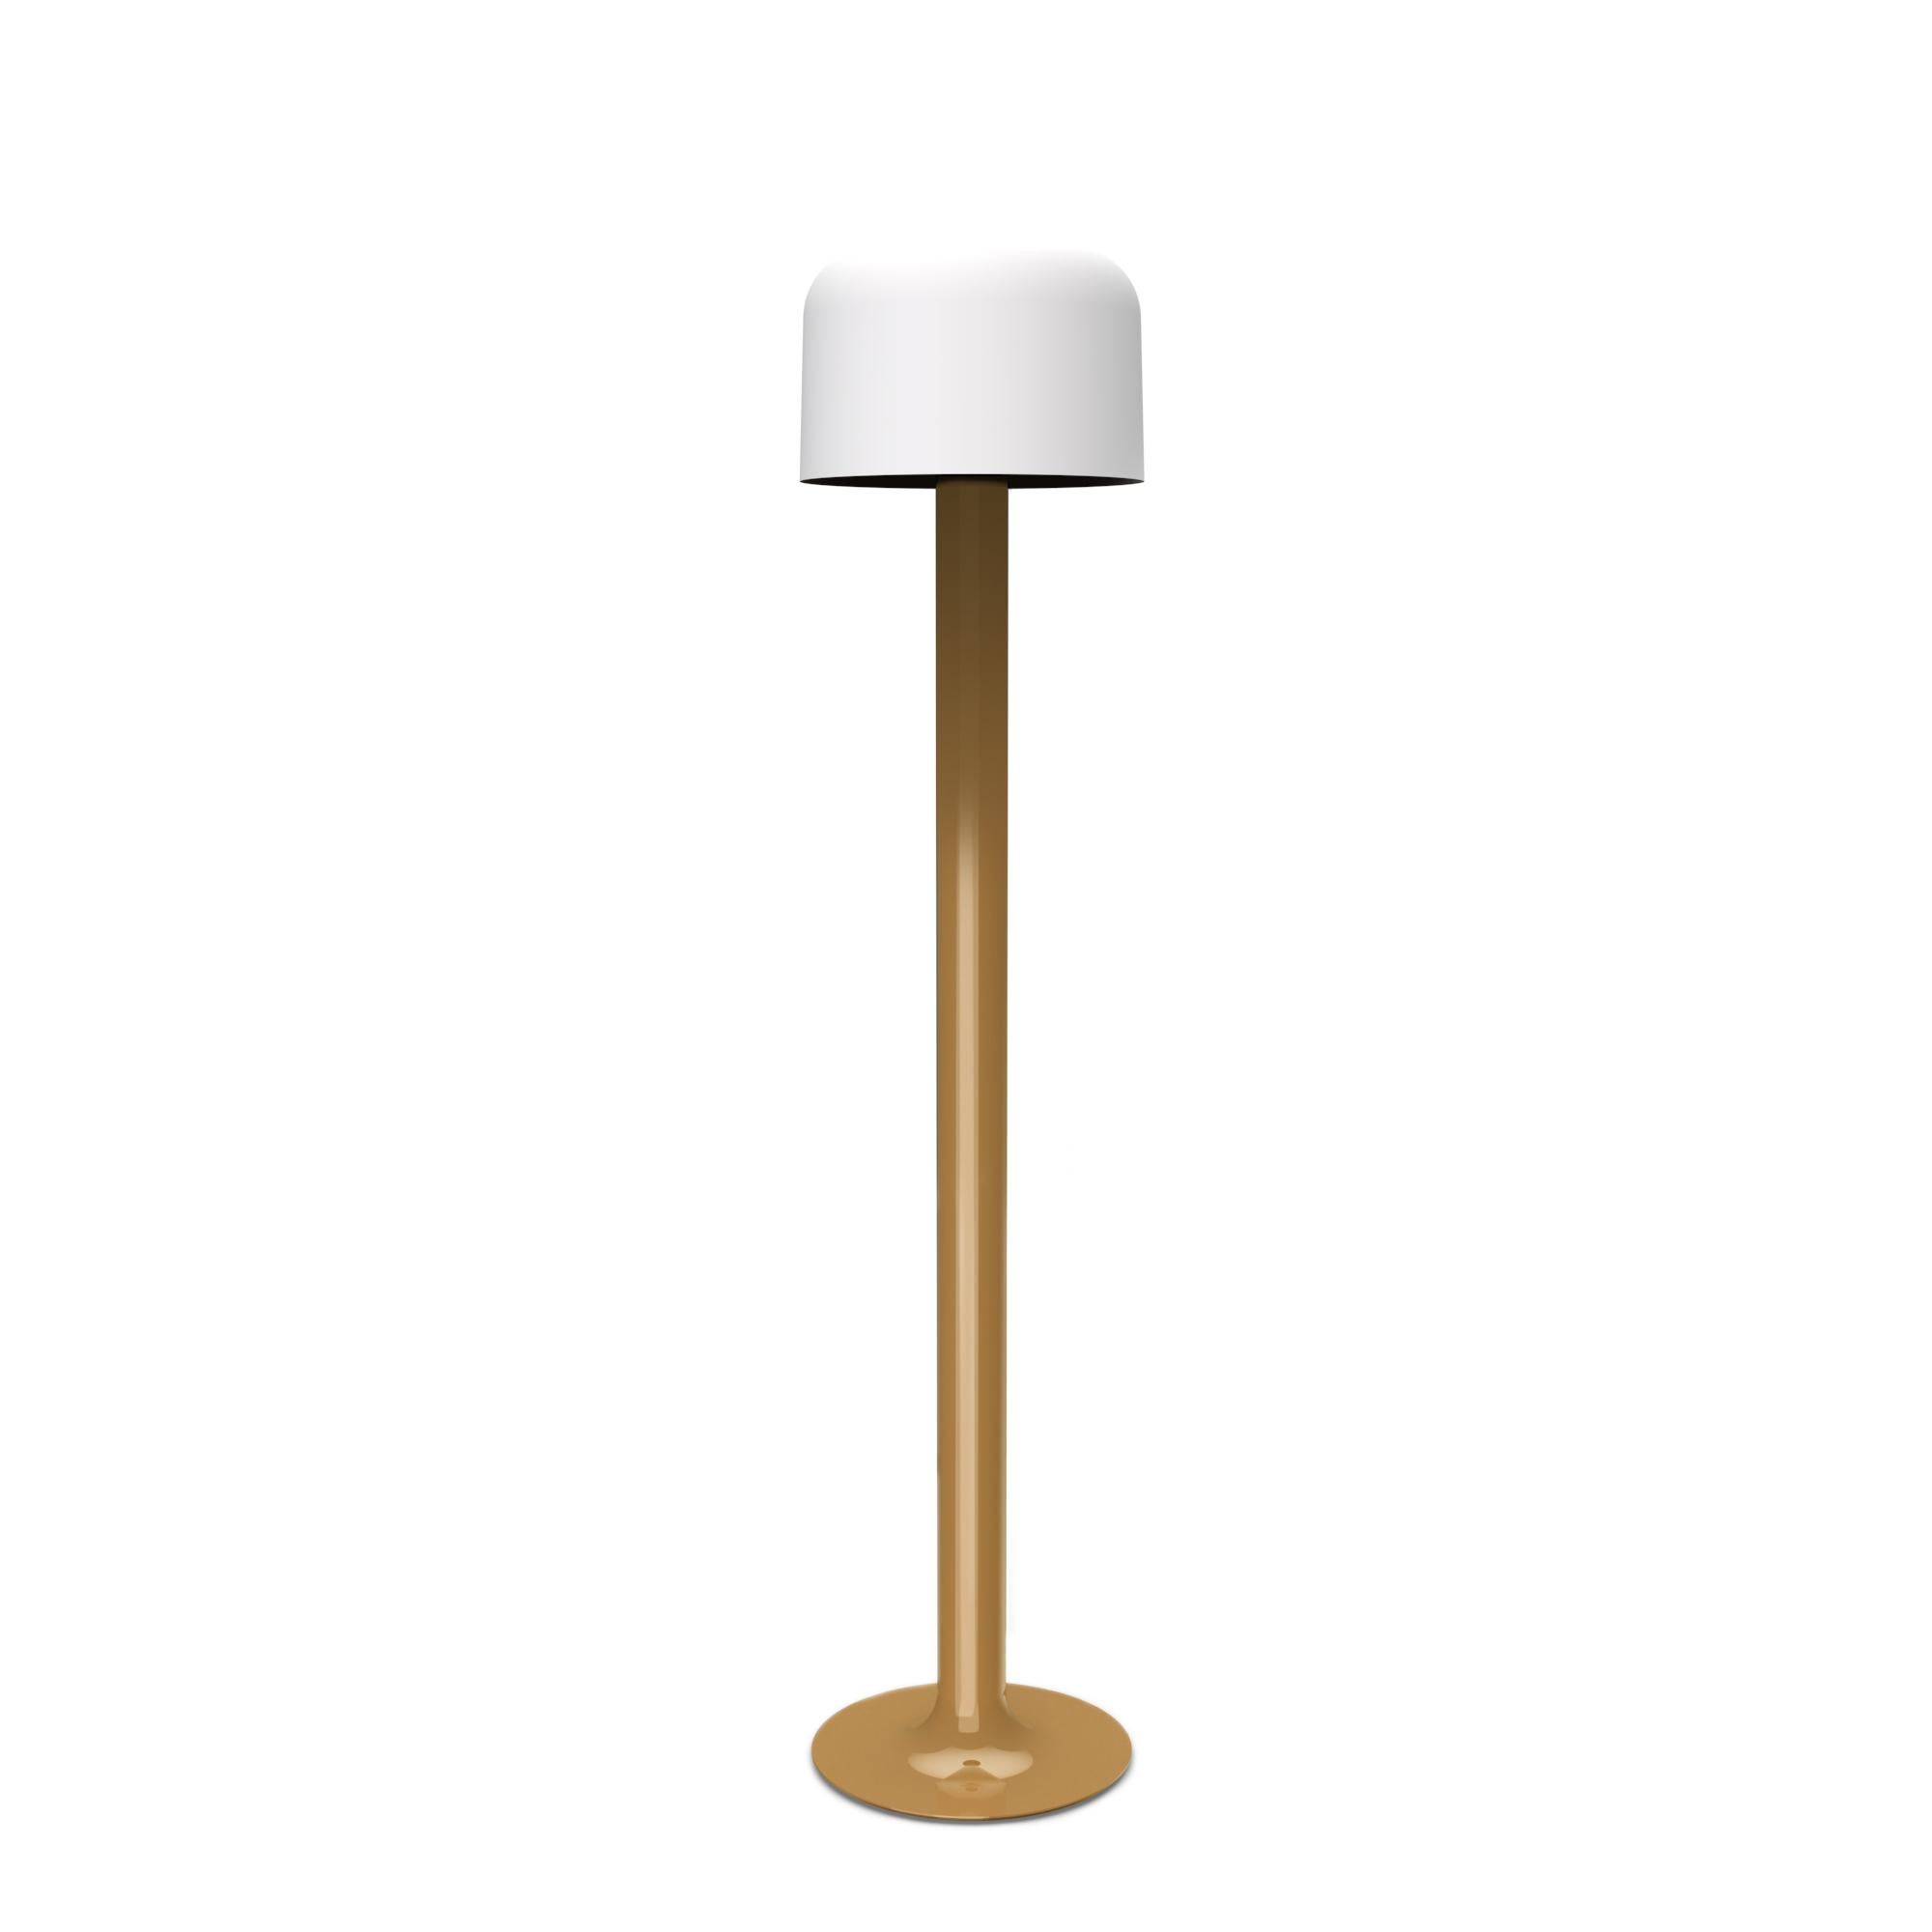 Michel Mortier 10527 metal and glass floor lamp for Disderot in chamois.

Originally designed in 1972, this sculptural floor lamp is a newly produced numbered edition with an authentication certificate. Made in France by Disderot with many of the